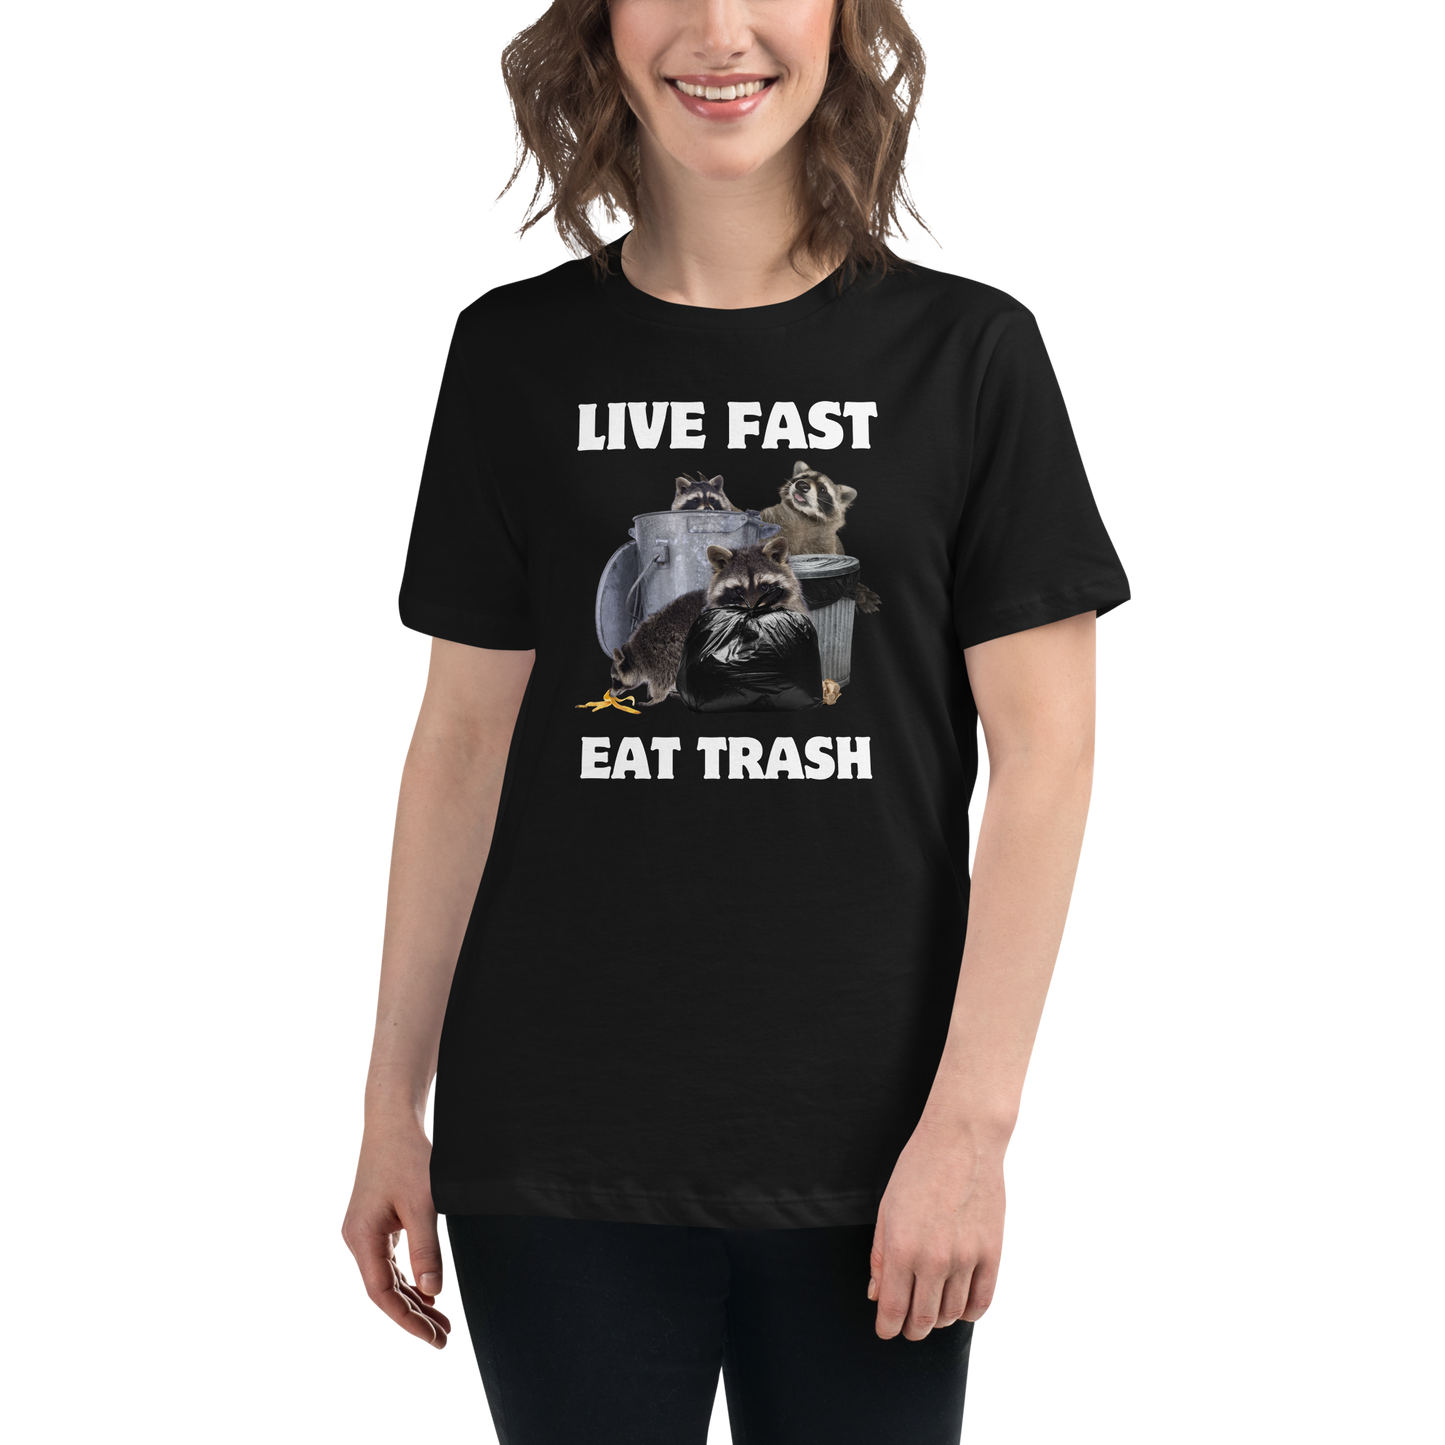 Smiling woman wearing a Women's Black Raccoon T-Shirt featuring a hilarious Live Fast Eat Trash graphic on the chest - Women's Funny Graphic Raccoon Tees - Boozy Fox